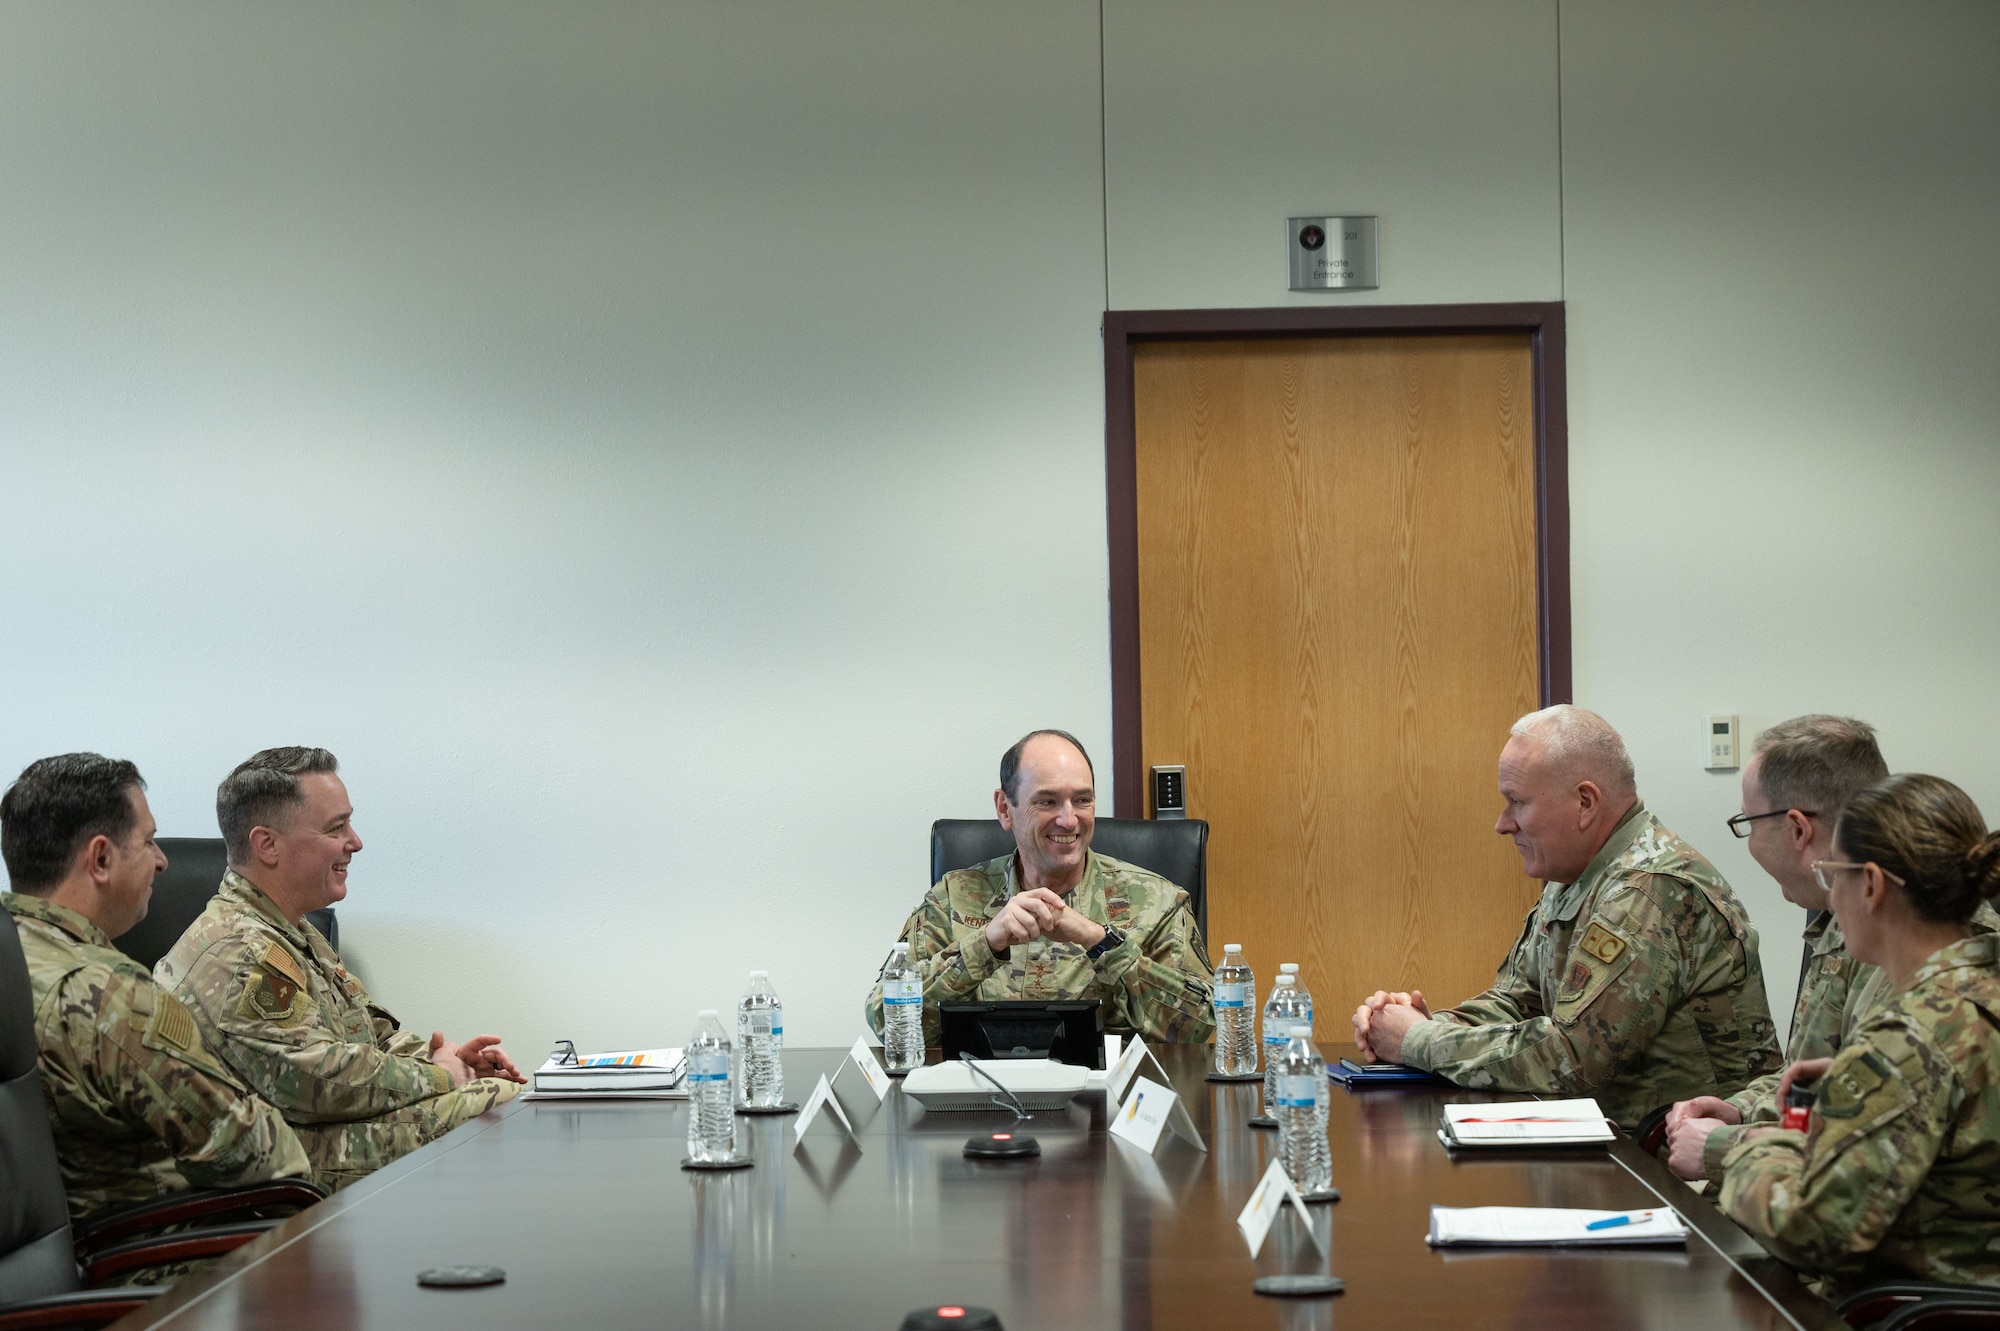 A group of men and women in military uniform sit around a conference table smiling and talking.